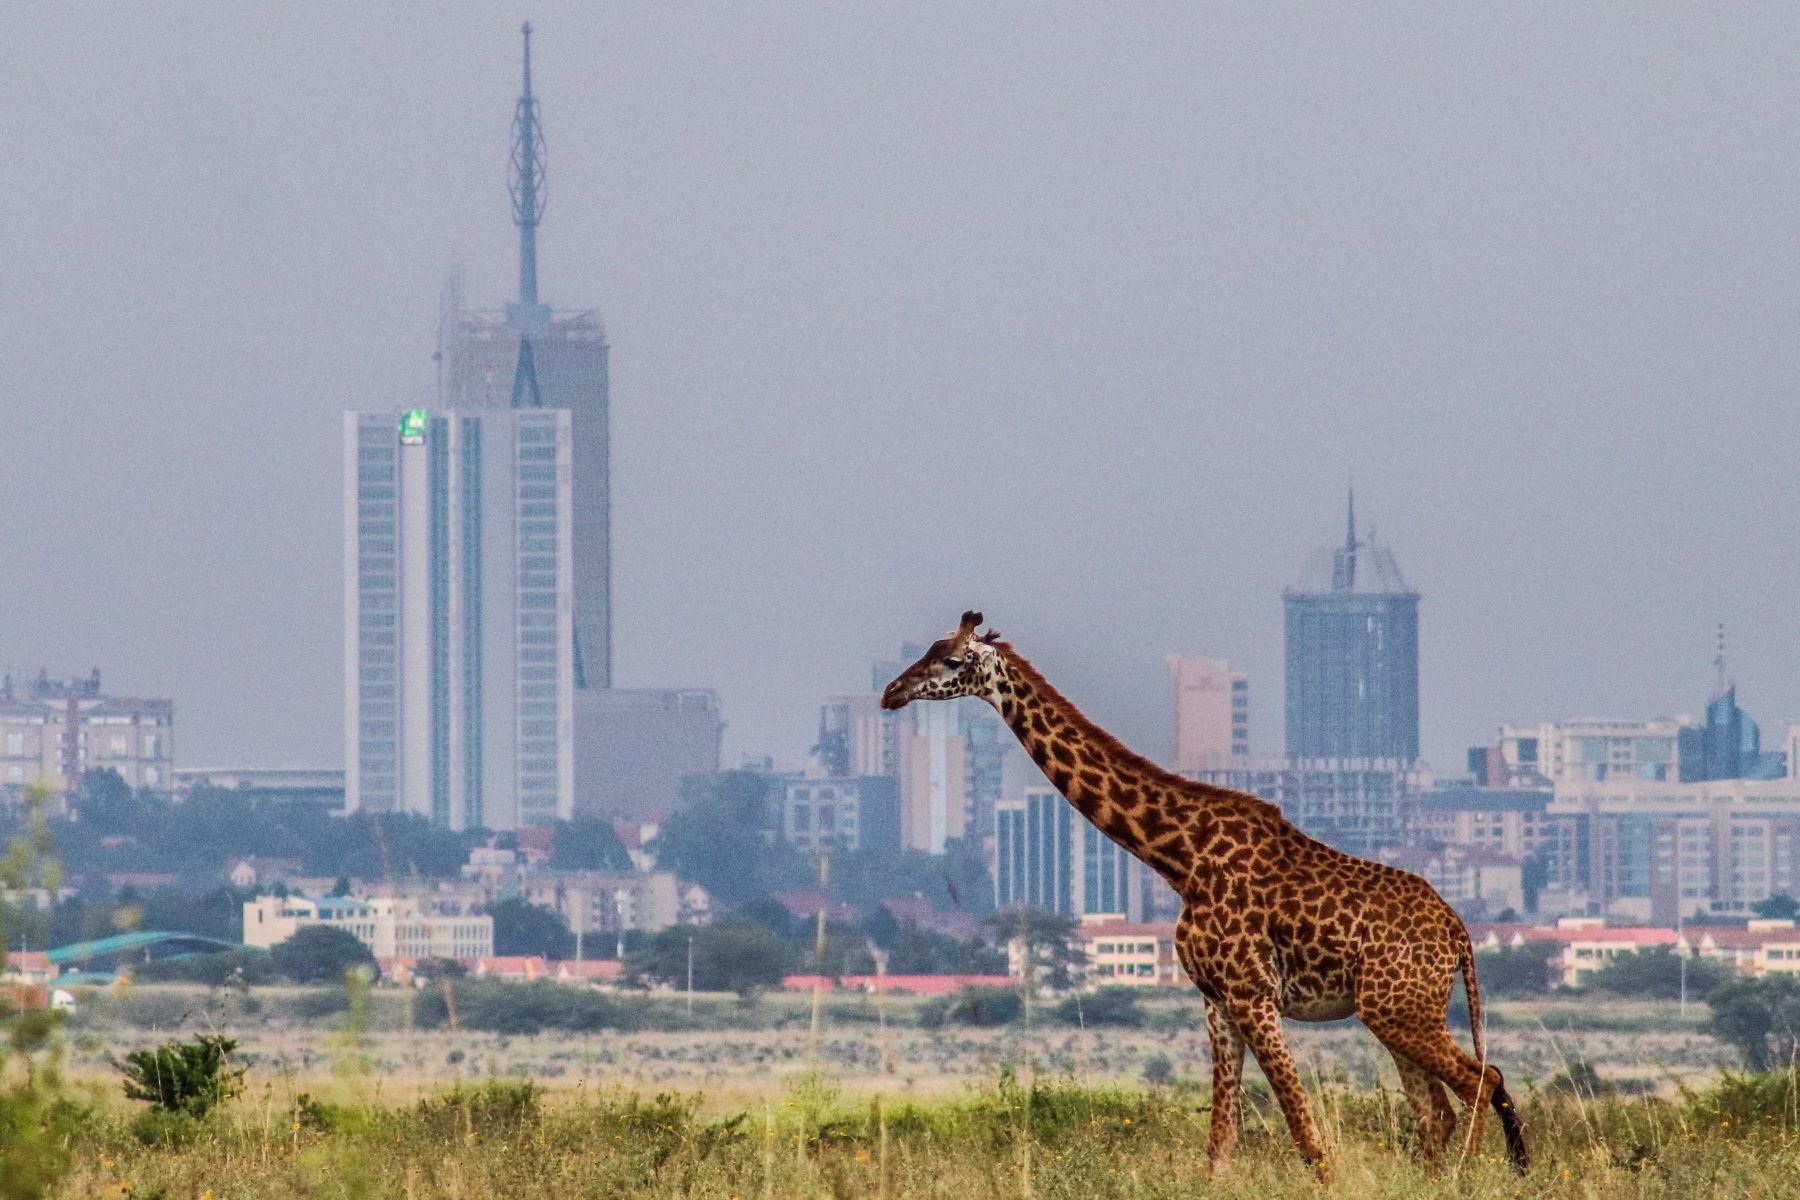 A giraffe in front of the Briam Tower in Nairobi, Kenya